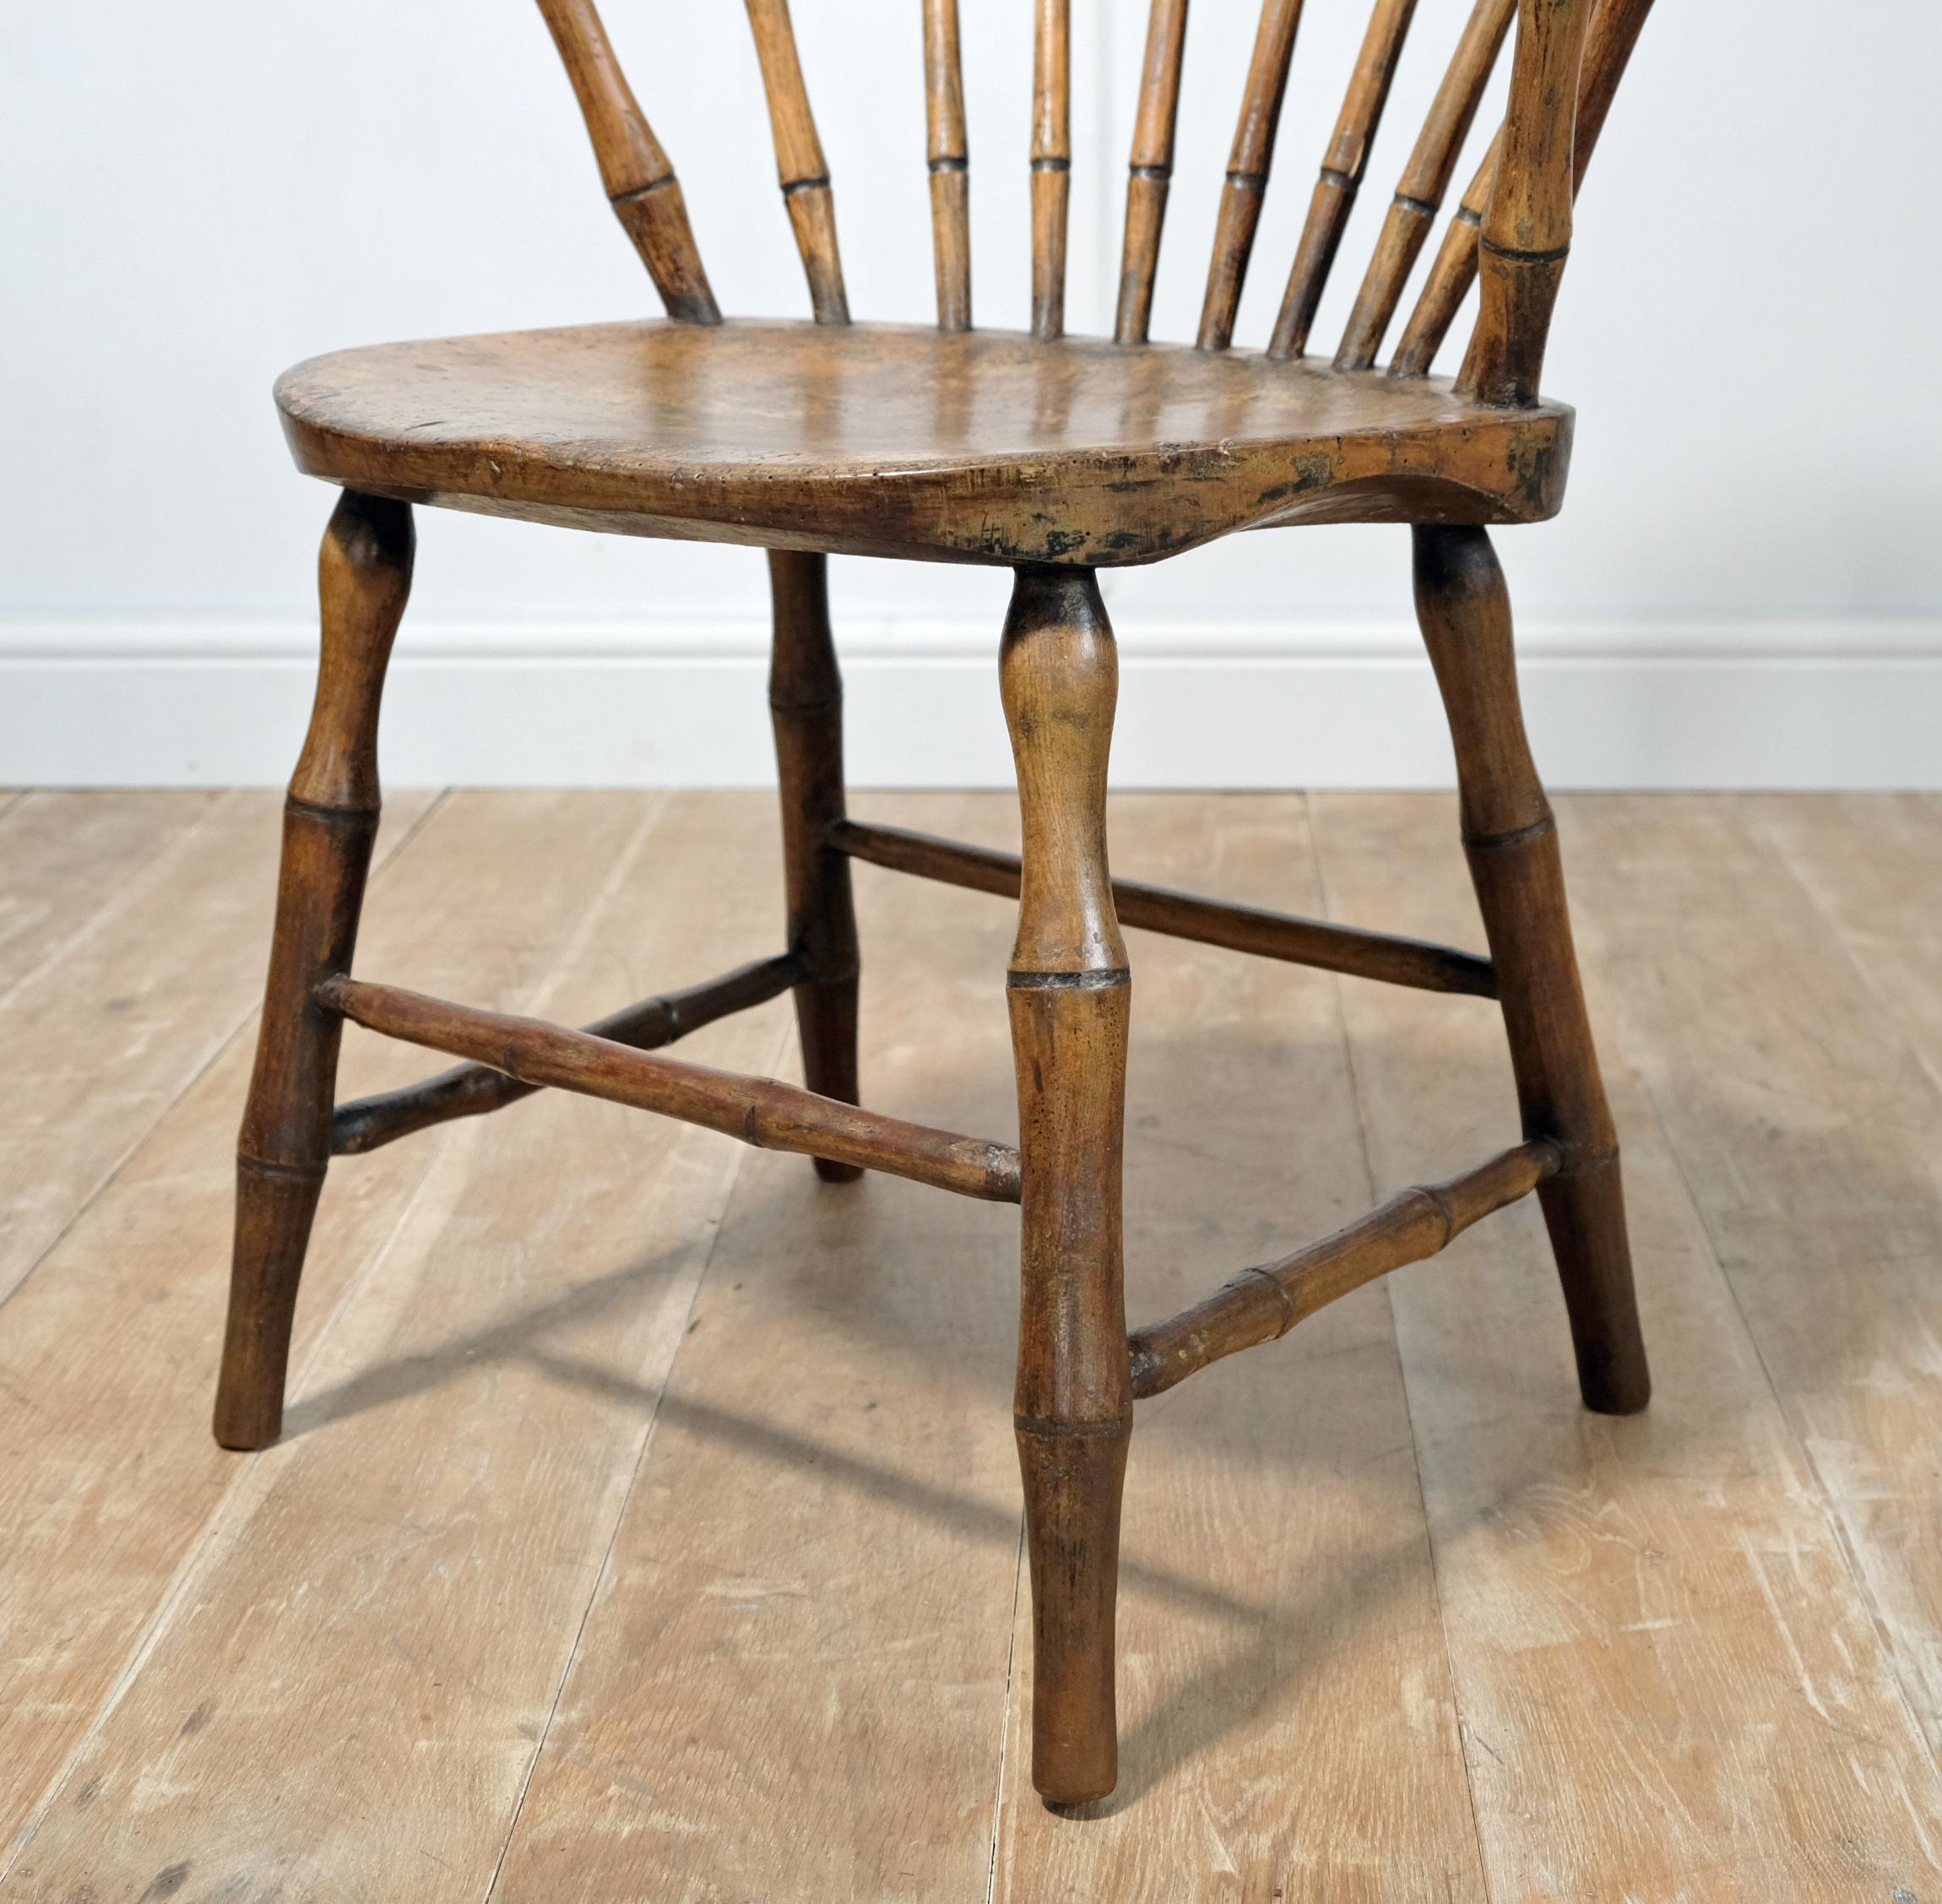 Continuous Arm Yealmpton Windsor Chair, English, Armchair, Original Paint, 1820s 1